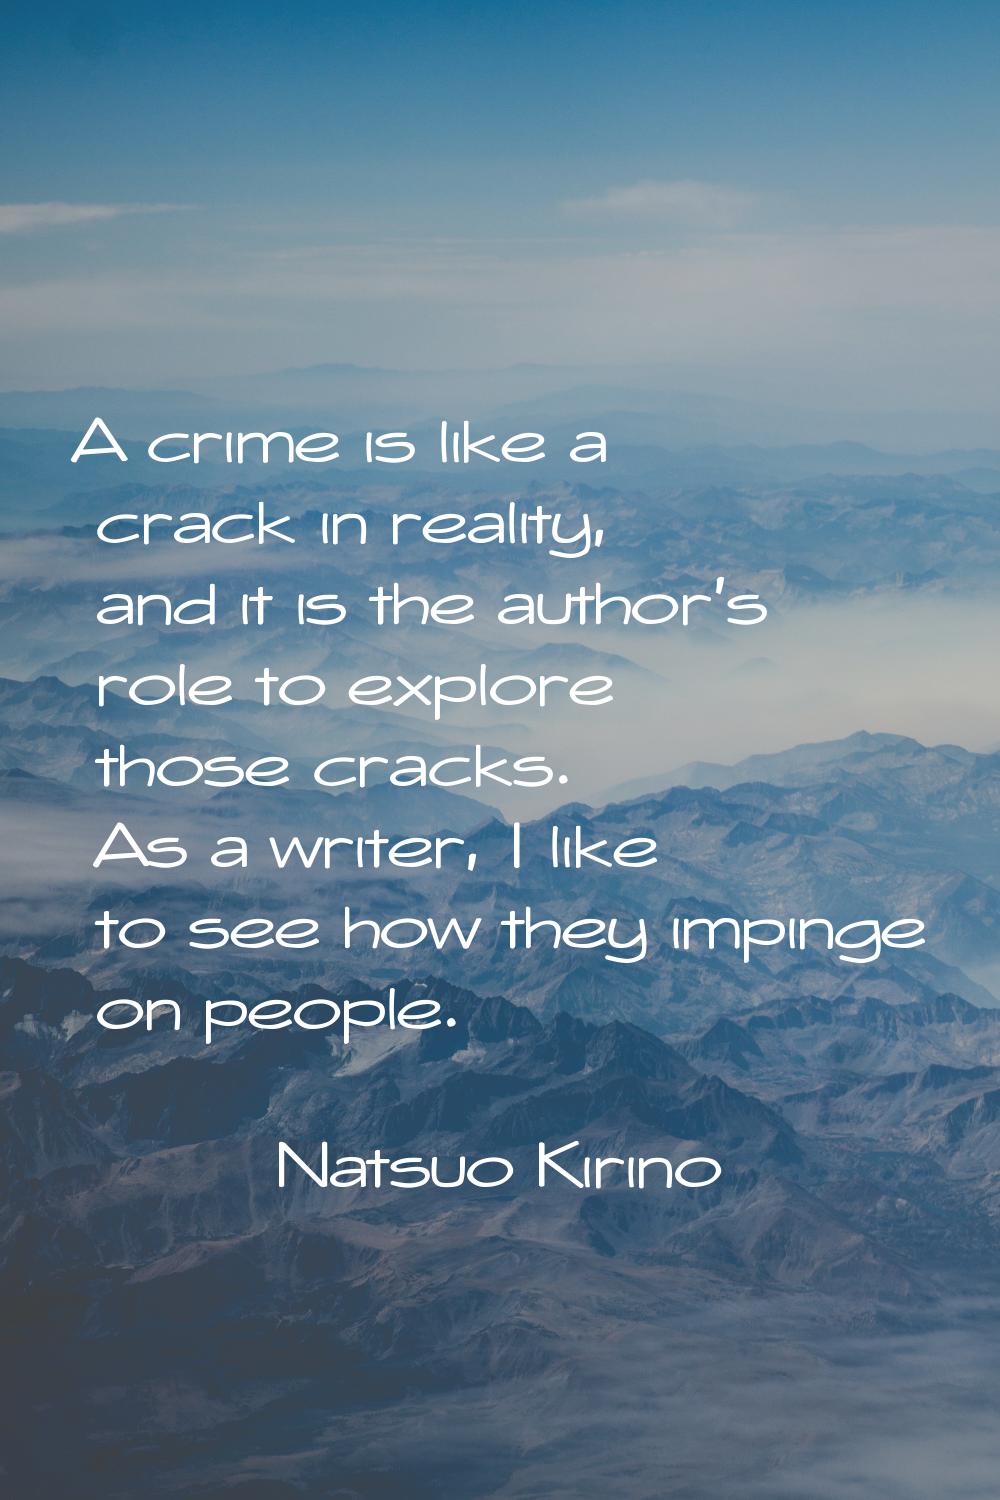 A crime is like a crack in reality, and it is the author's role to explore those cracks. As a write